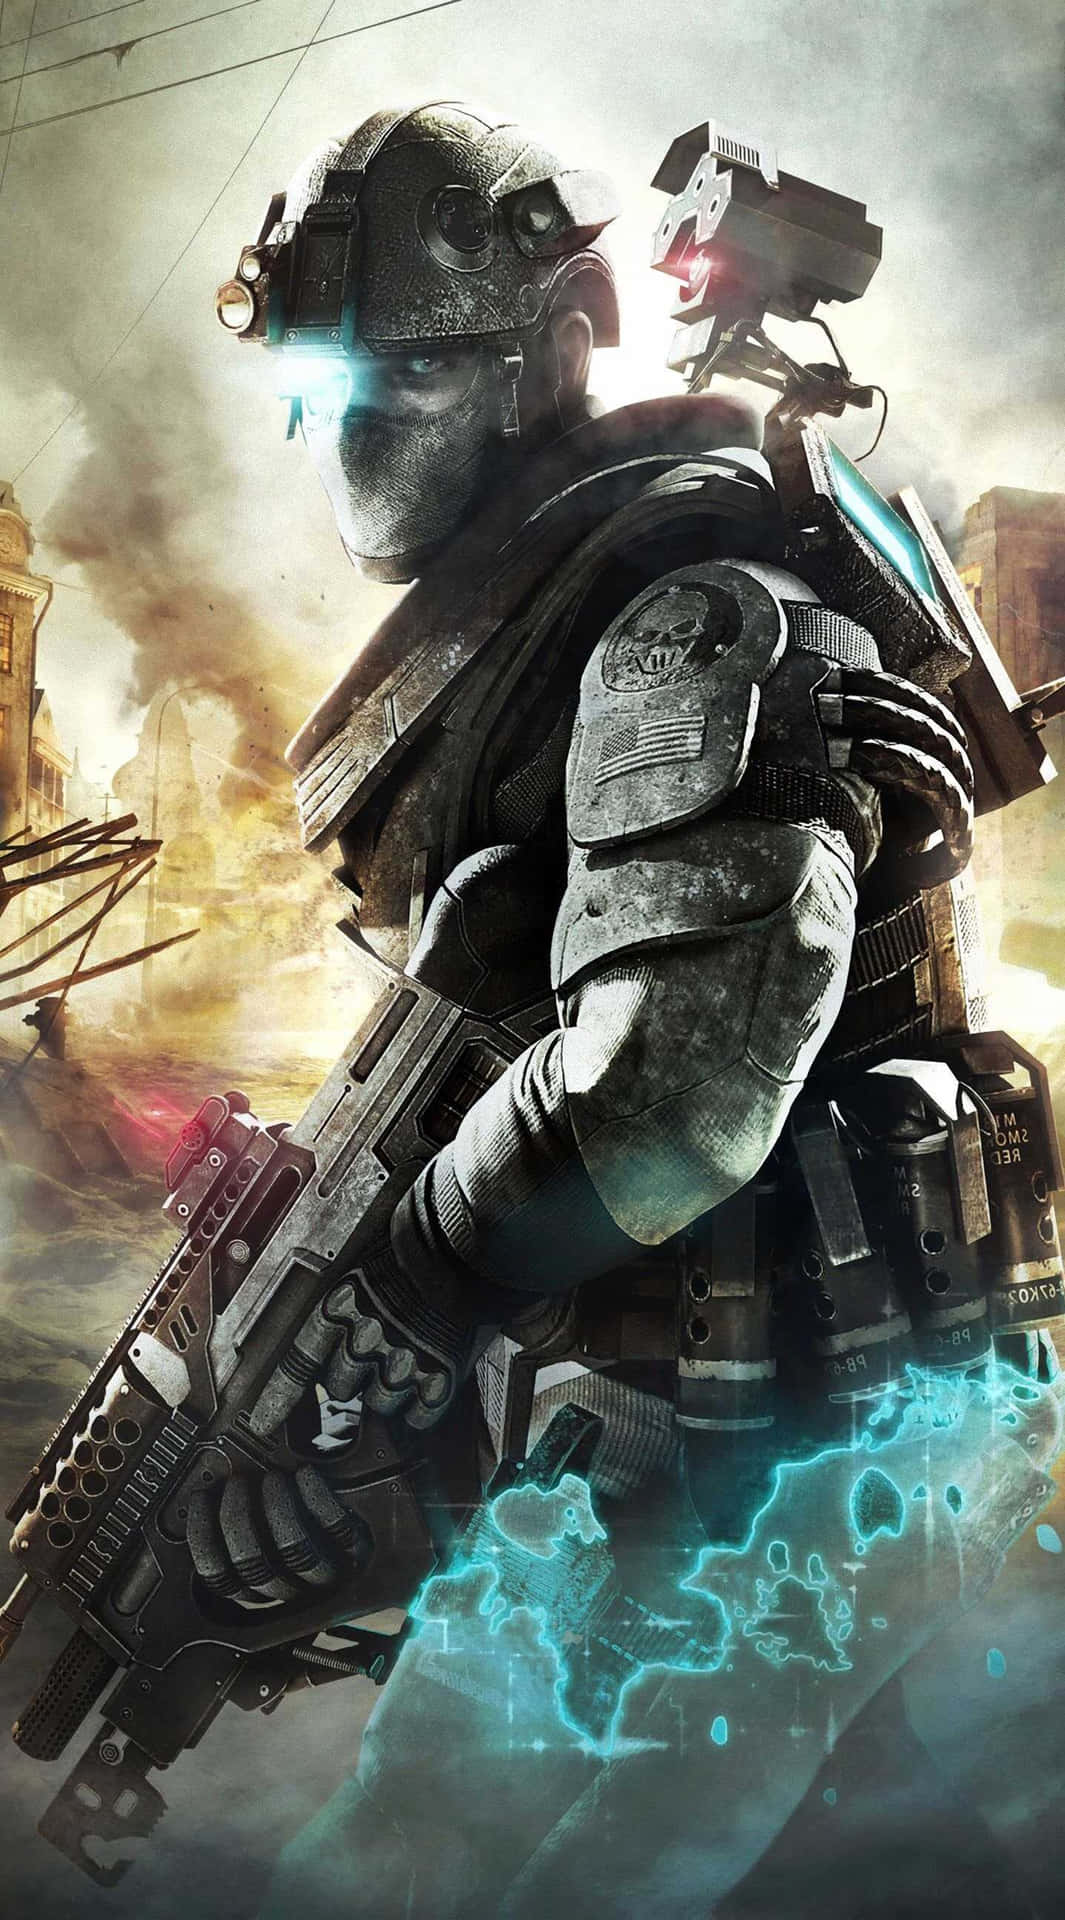 A Soldier In A Video Game Holding A Gun Wallpaper